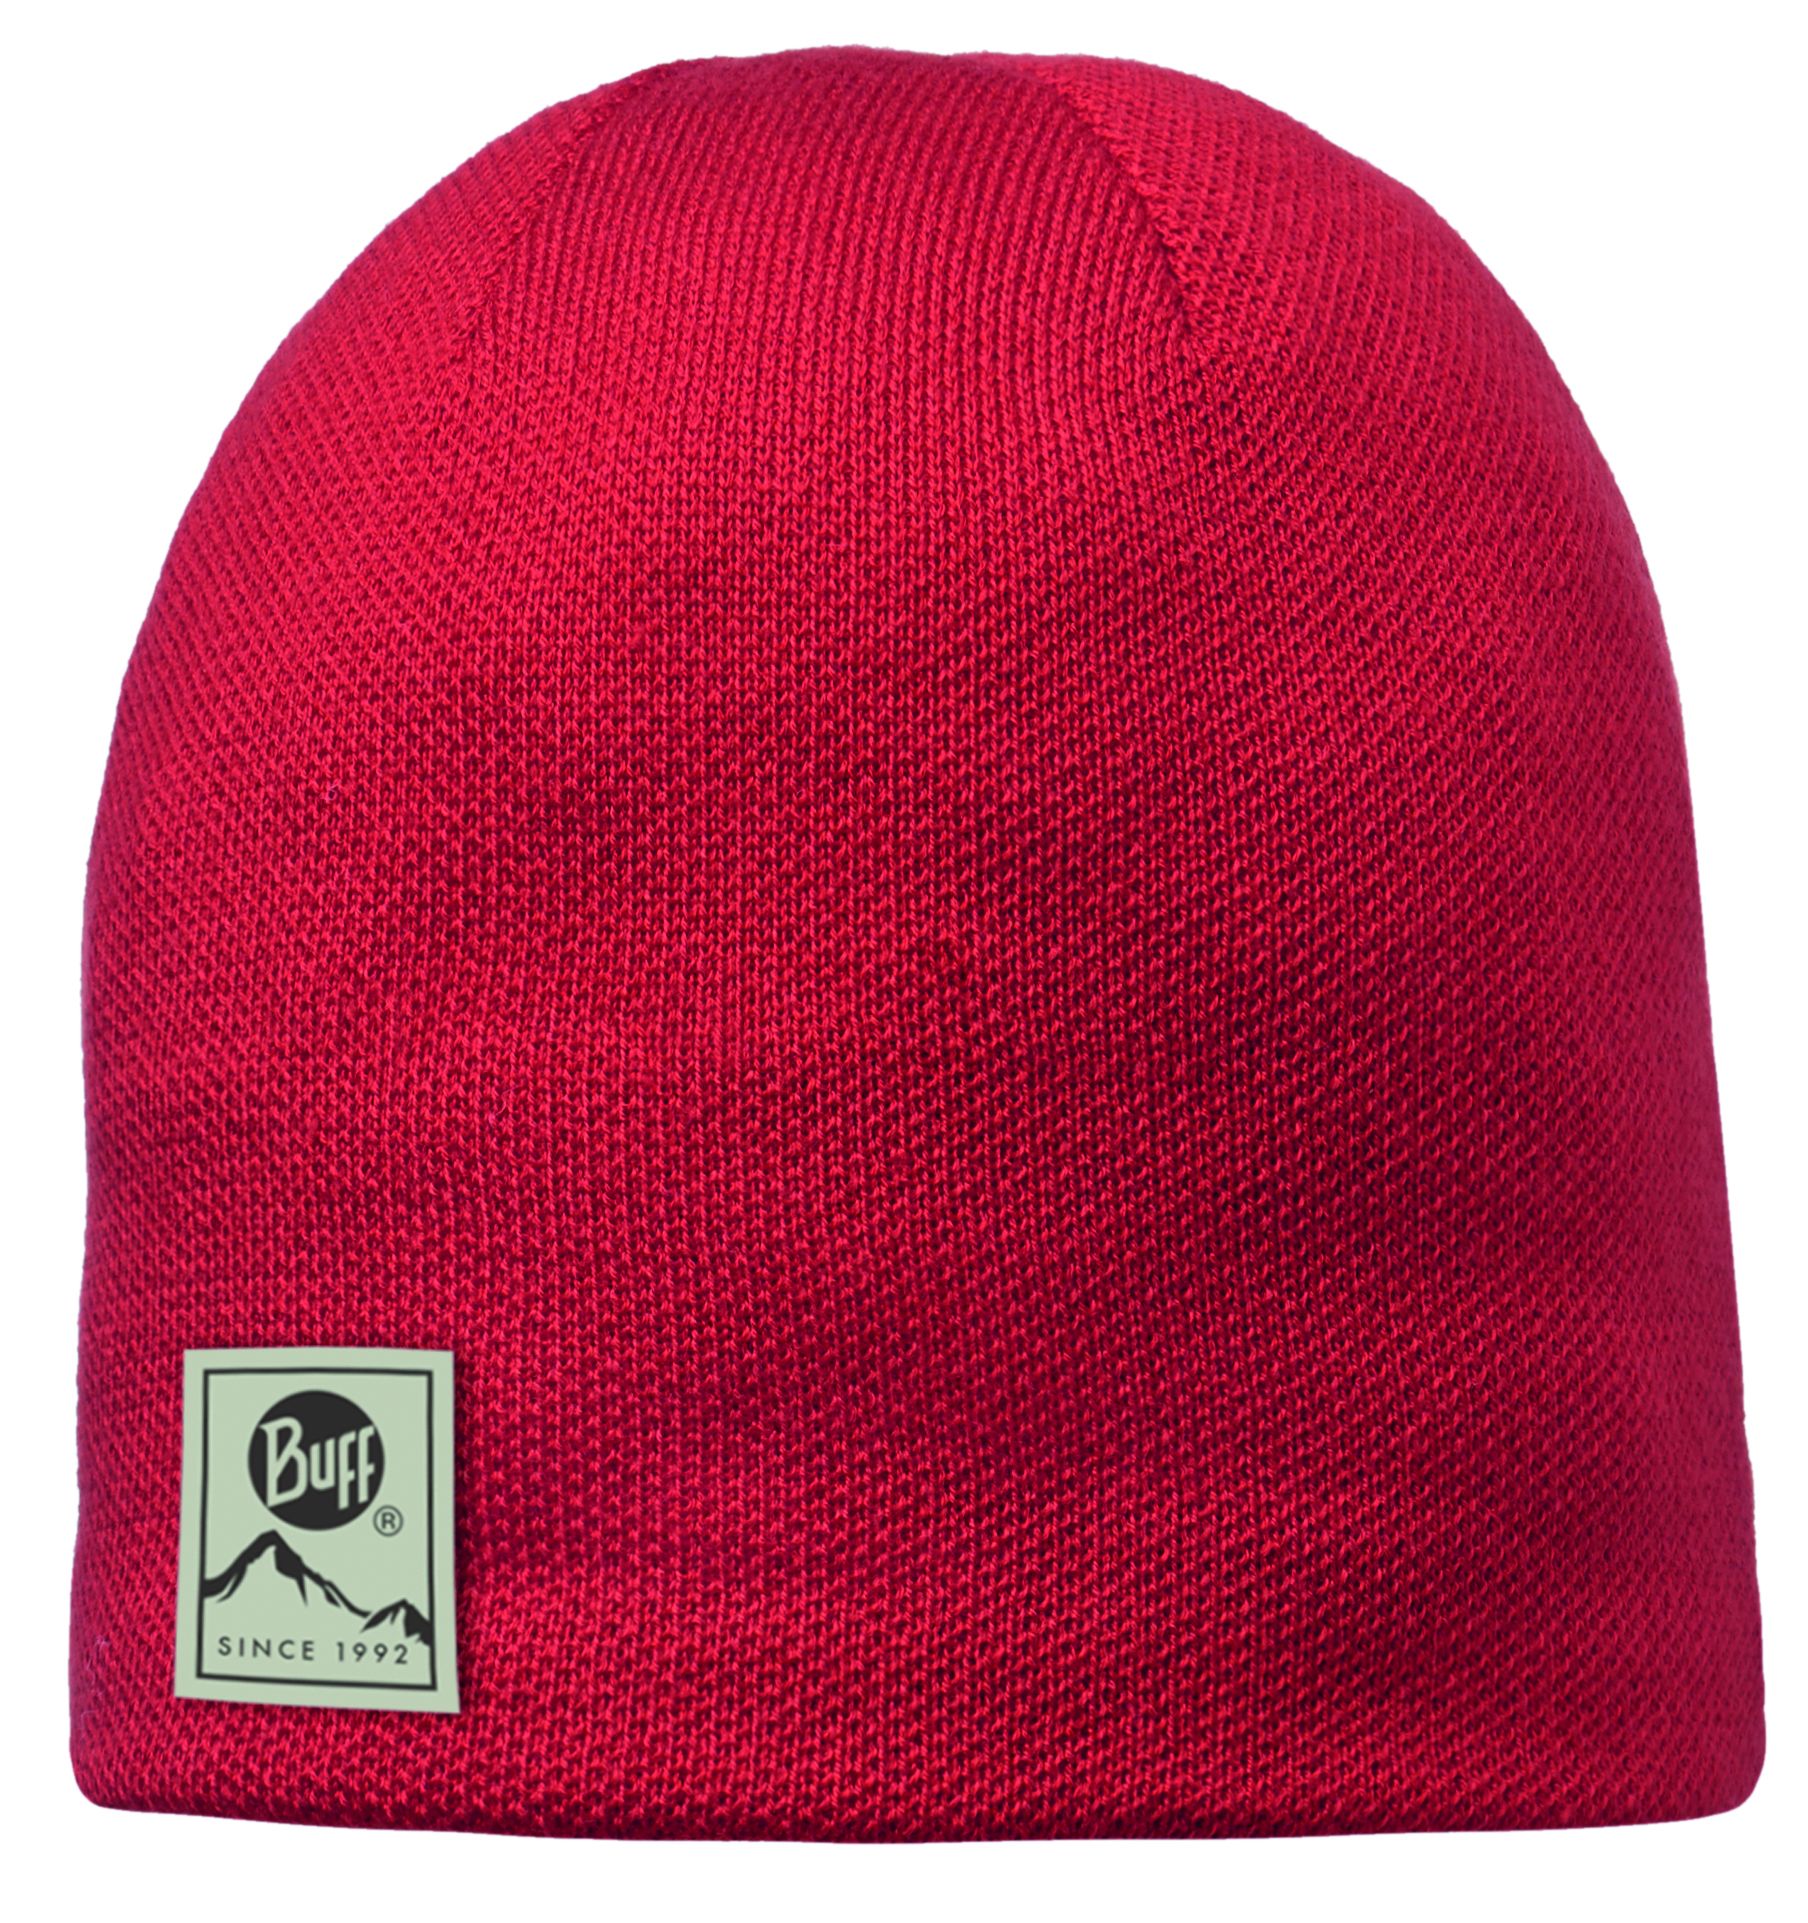 Шапка Buff Knitted Hats Buff Solid Red